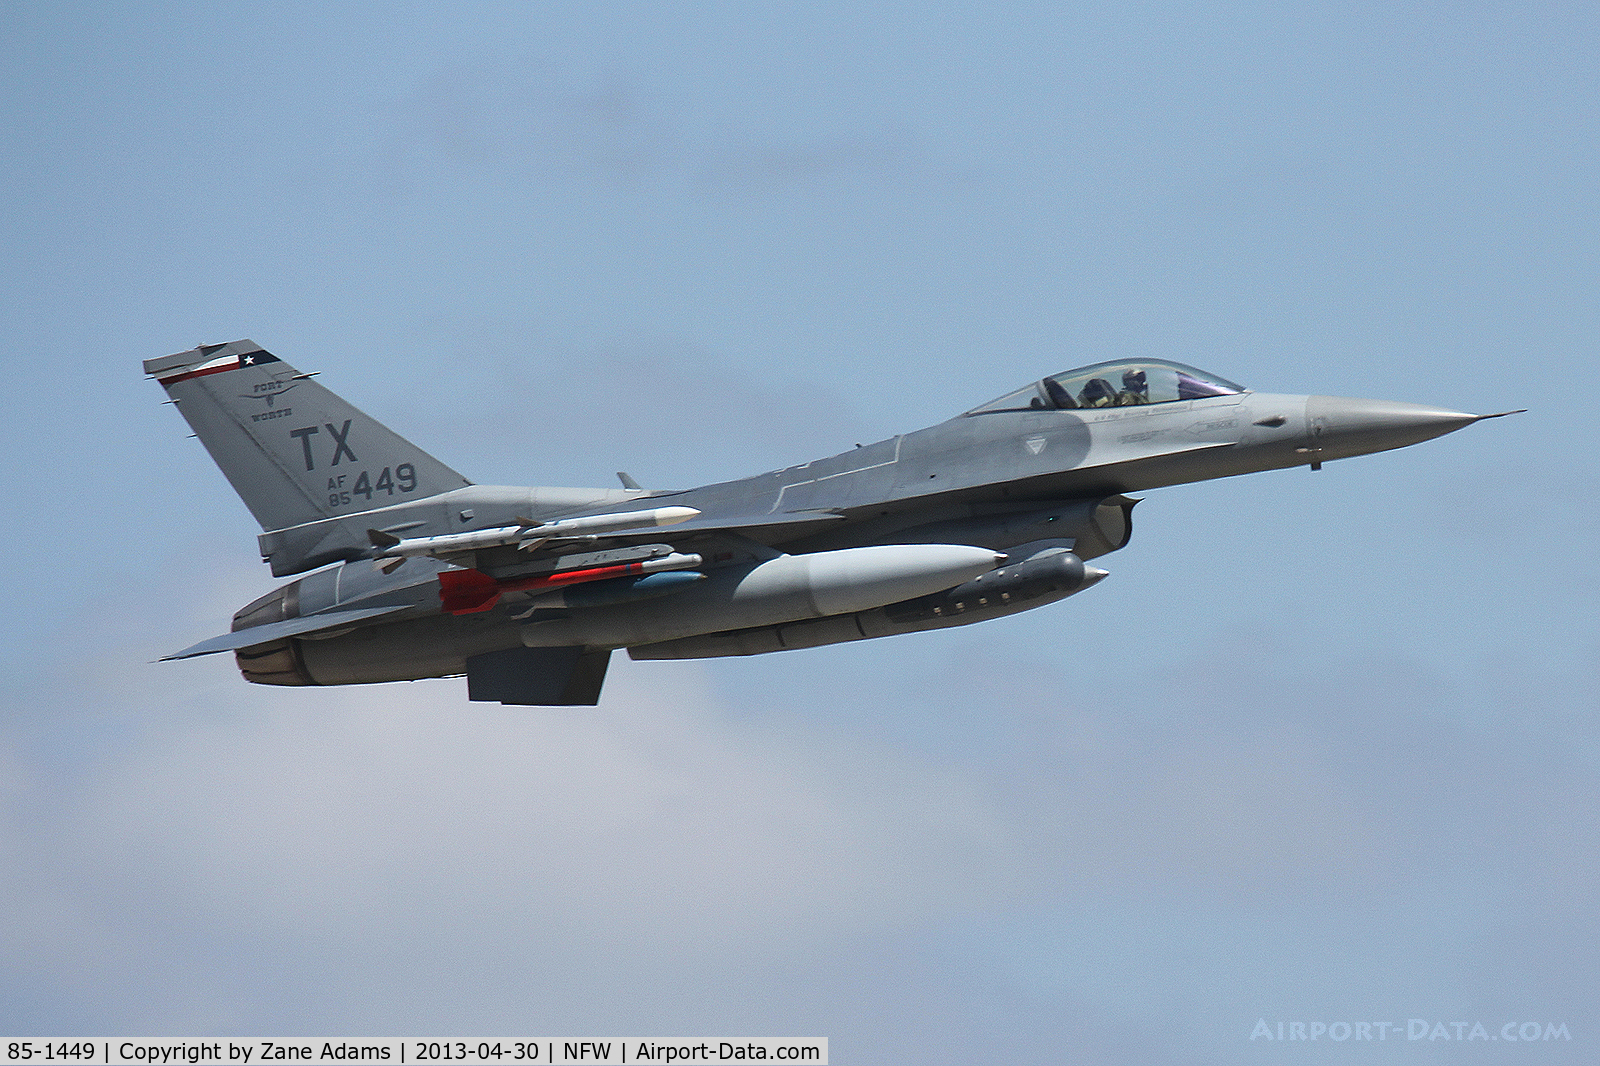 85-1449, 1985 General Dynamics F-16C Fighting Falcon C/N 5C-229, 301st Fighter Wing F-16 at NASJRB Fort Worth